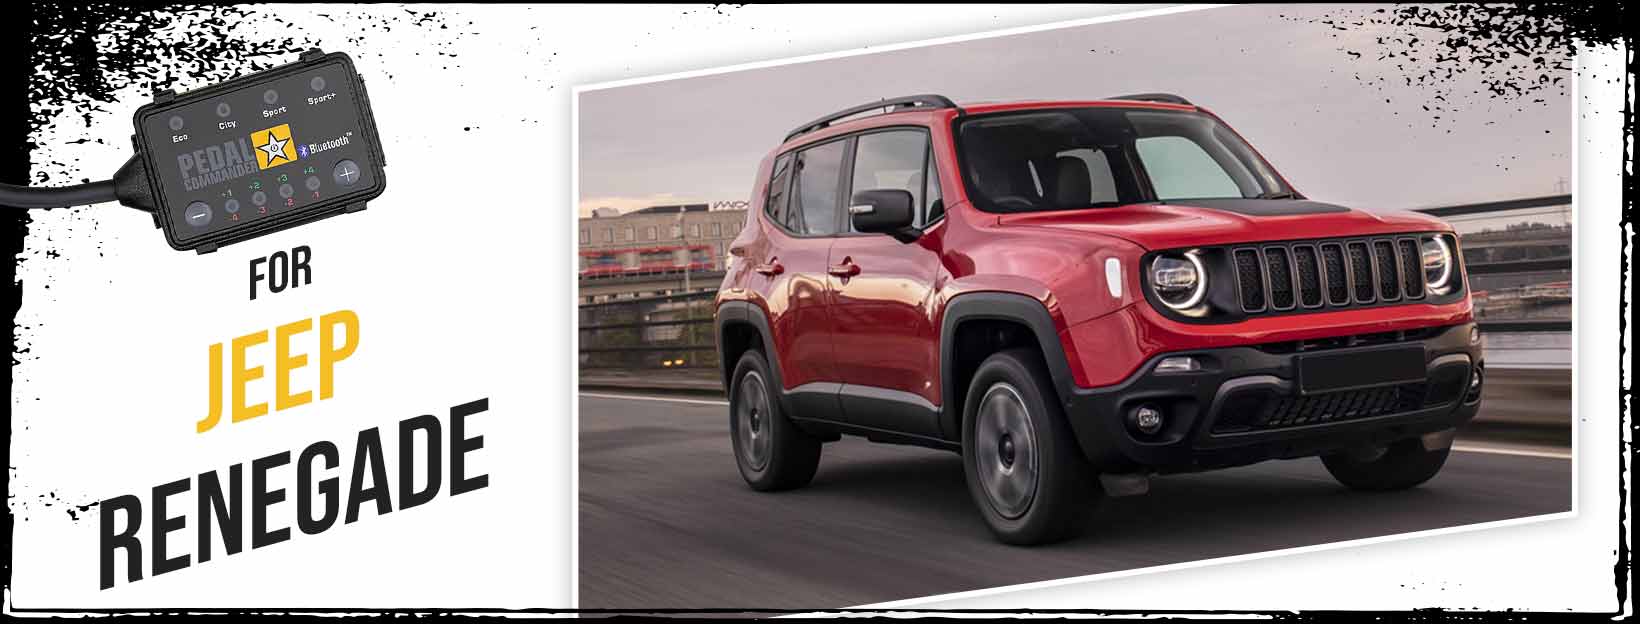 Pedal Commander for Jeep Renegade